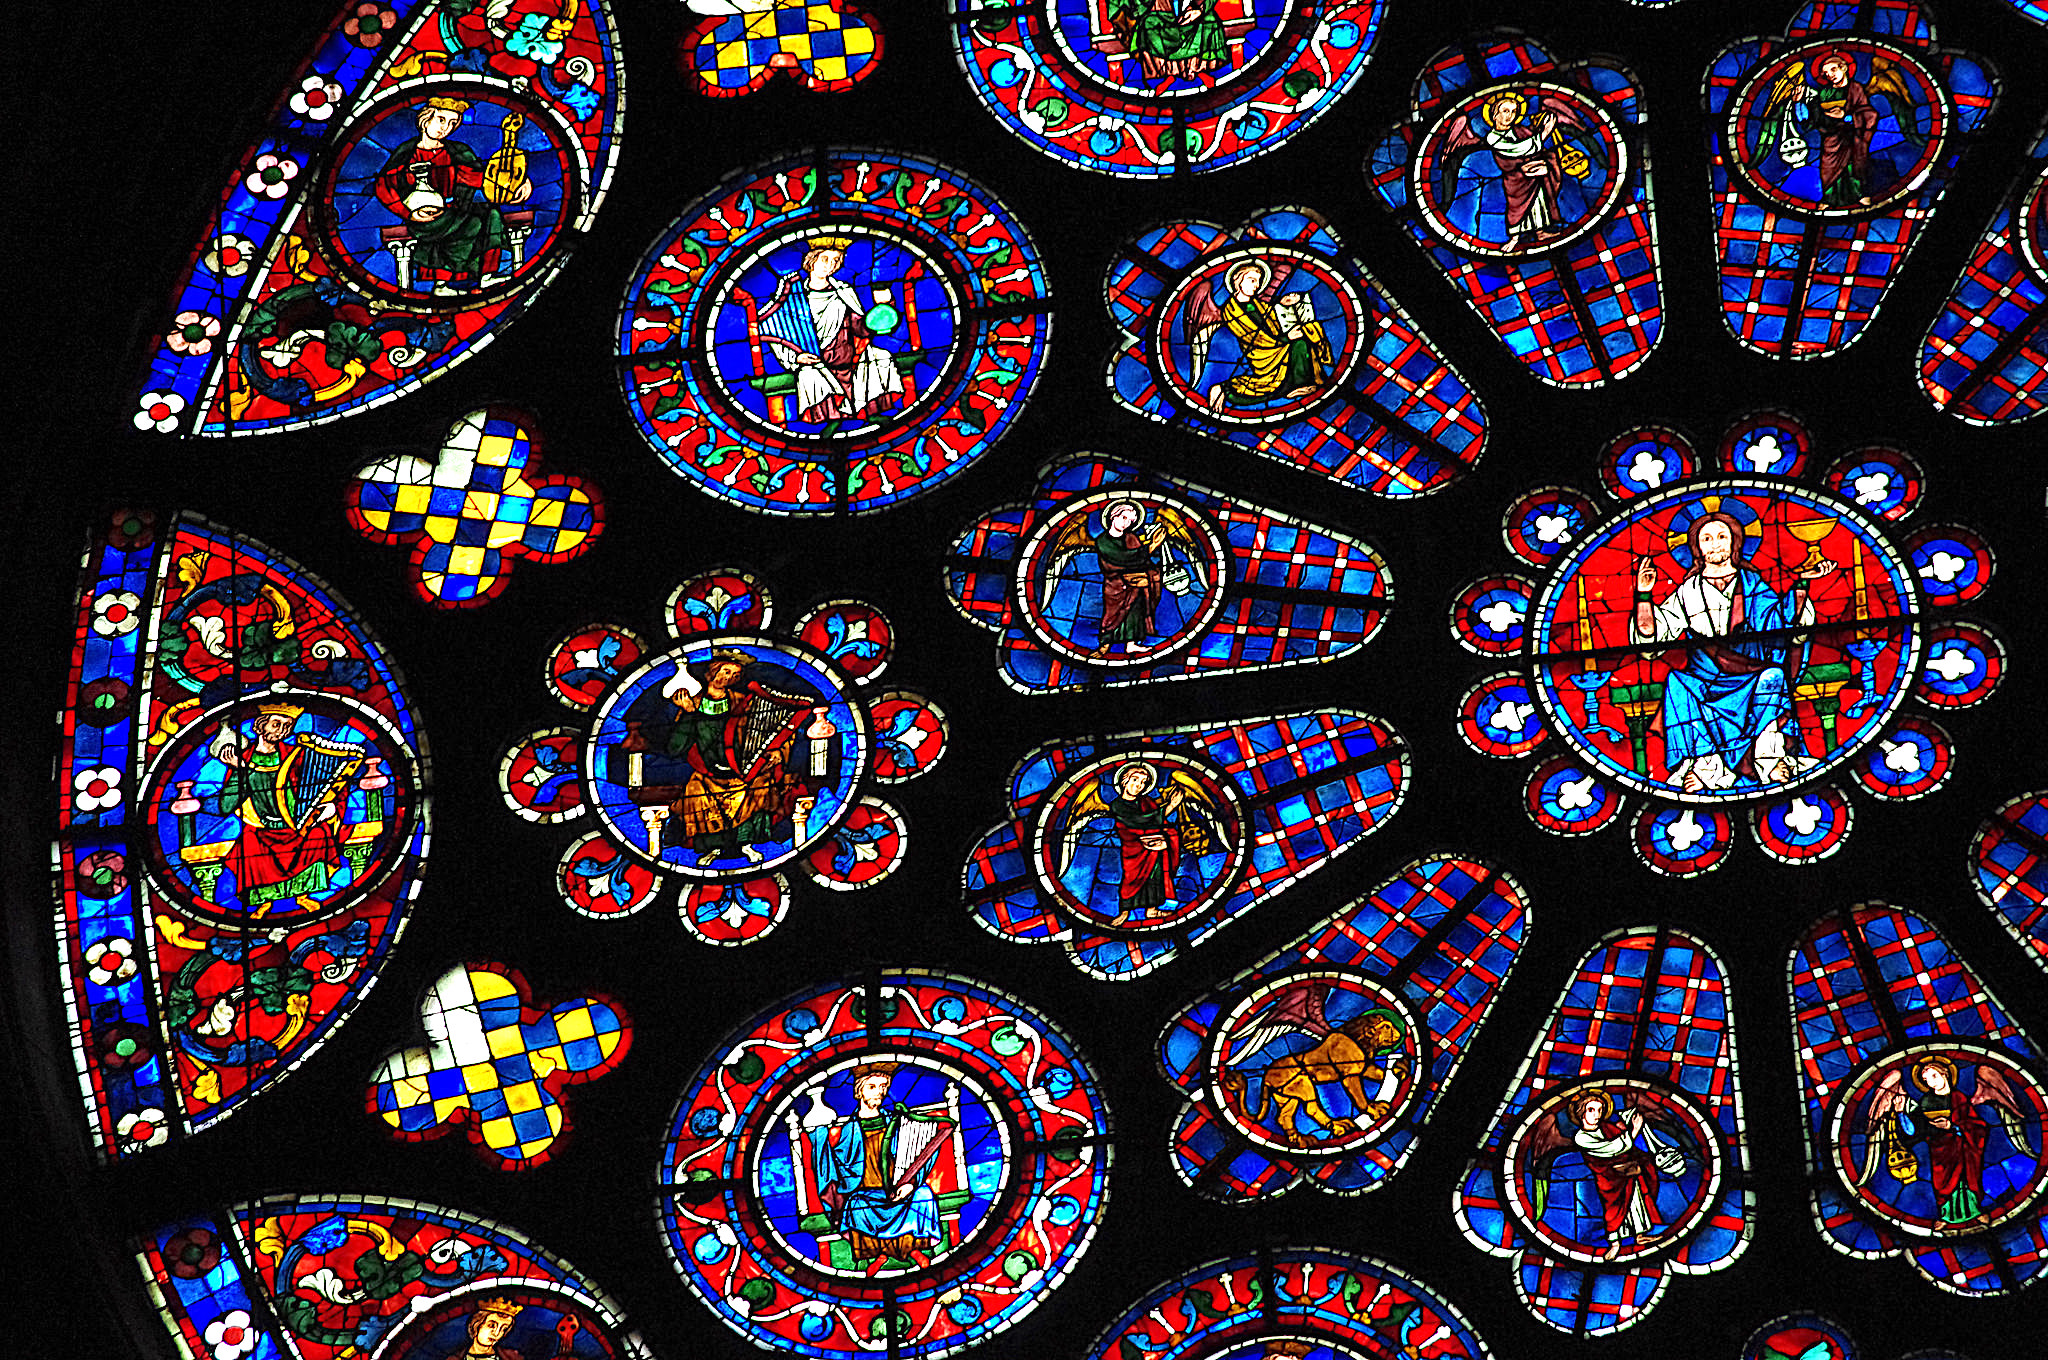 Detail, South Rose Window, Chartres Cathedral (Illustration) - World